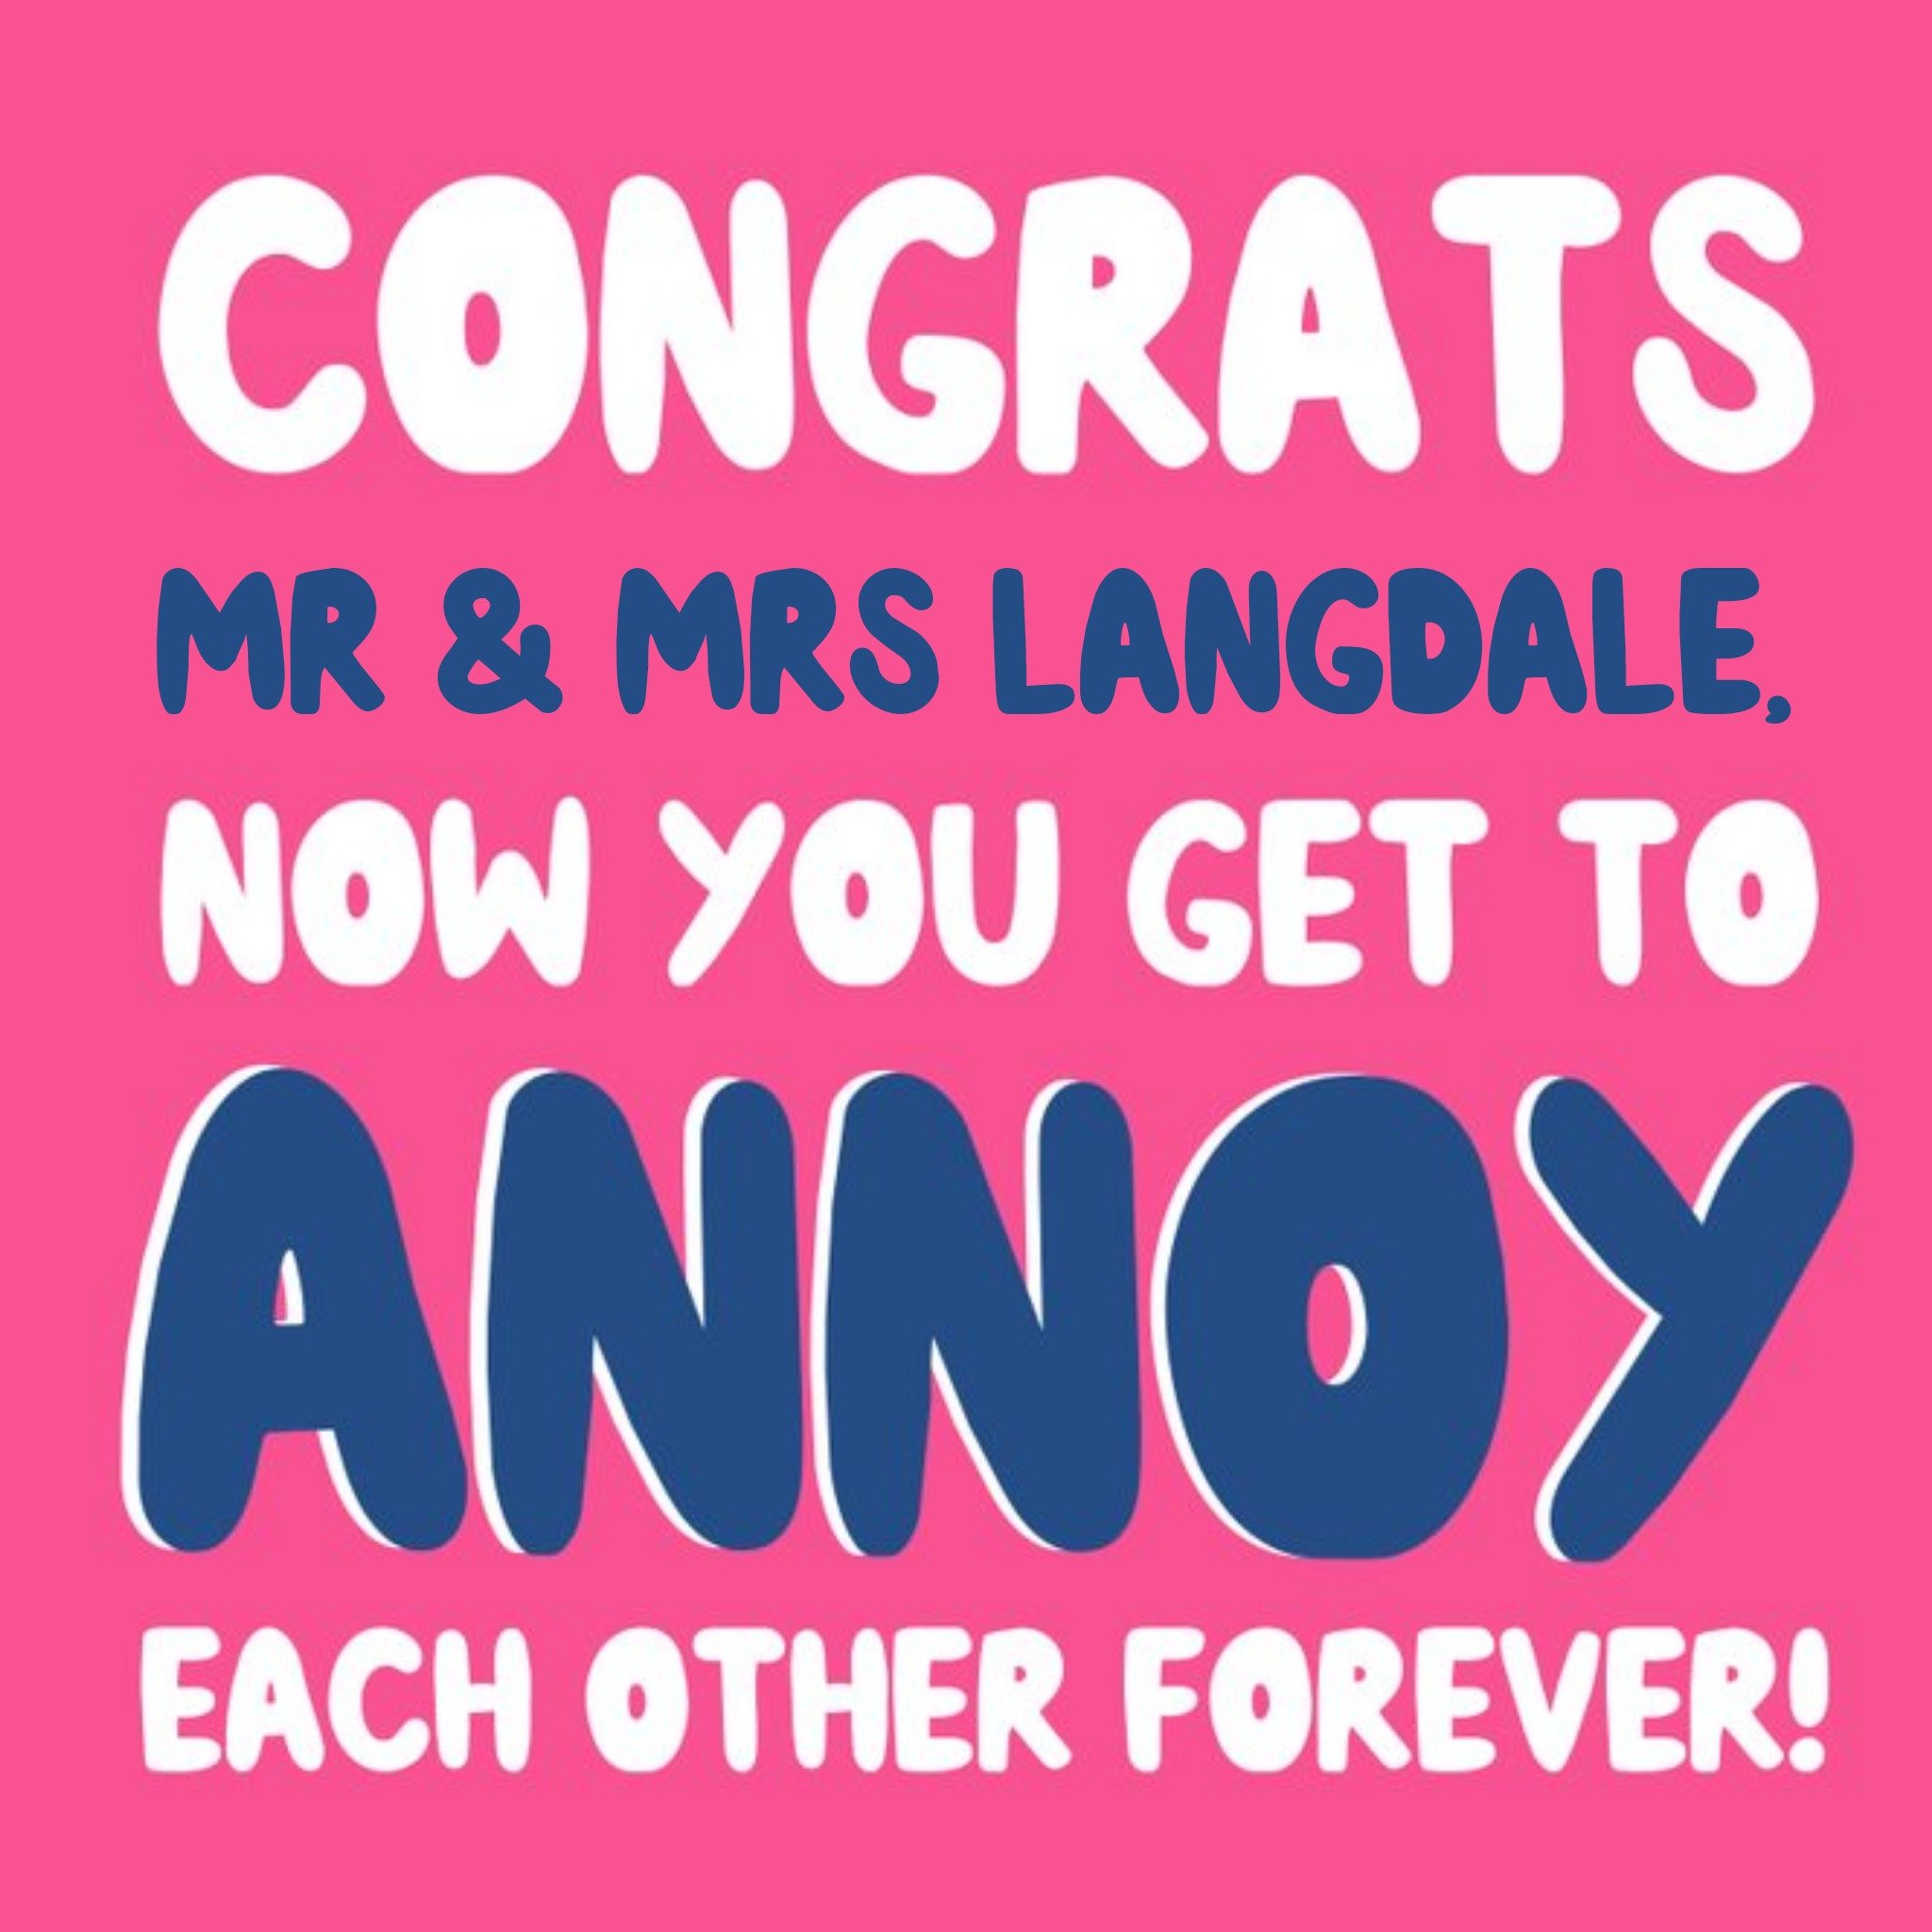 Moonpig Annoy Each Other Forever Funny Wedding Card, Large